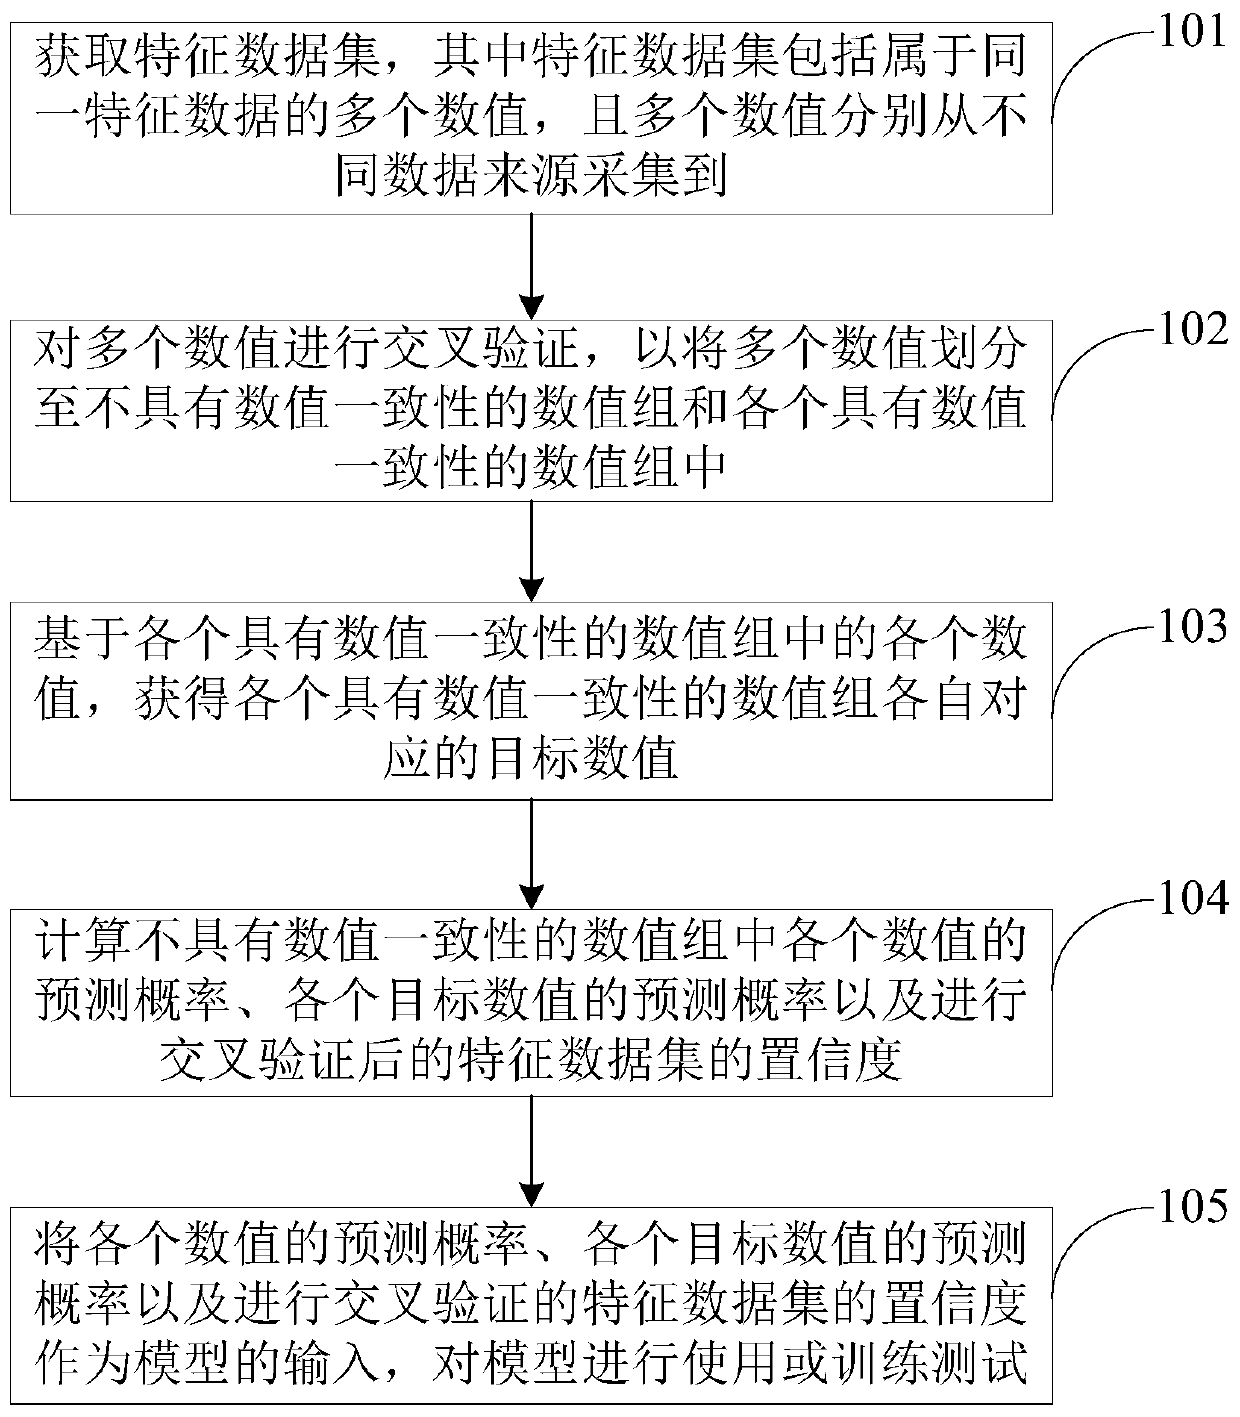 Method and device for evaluating feature distribution and confidence of data